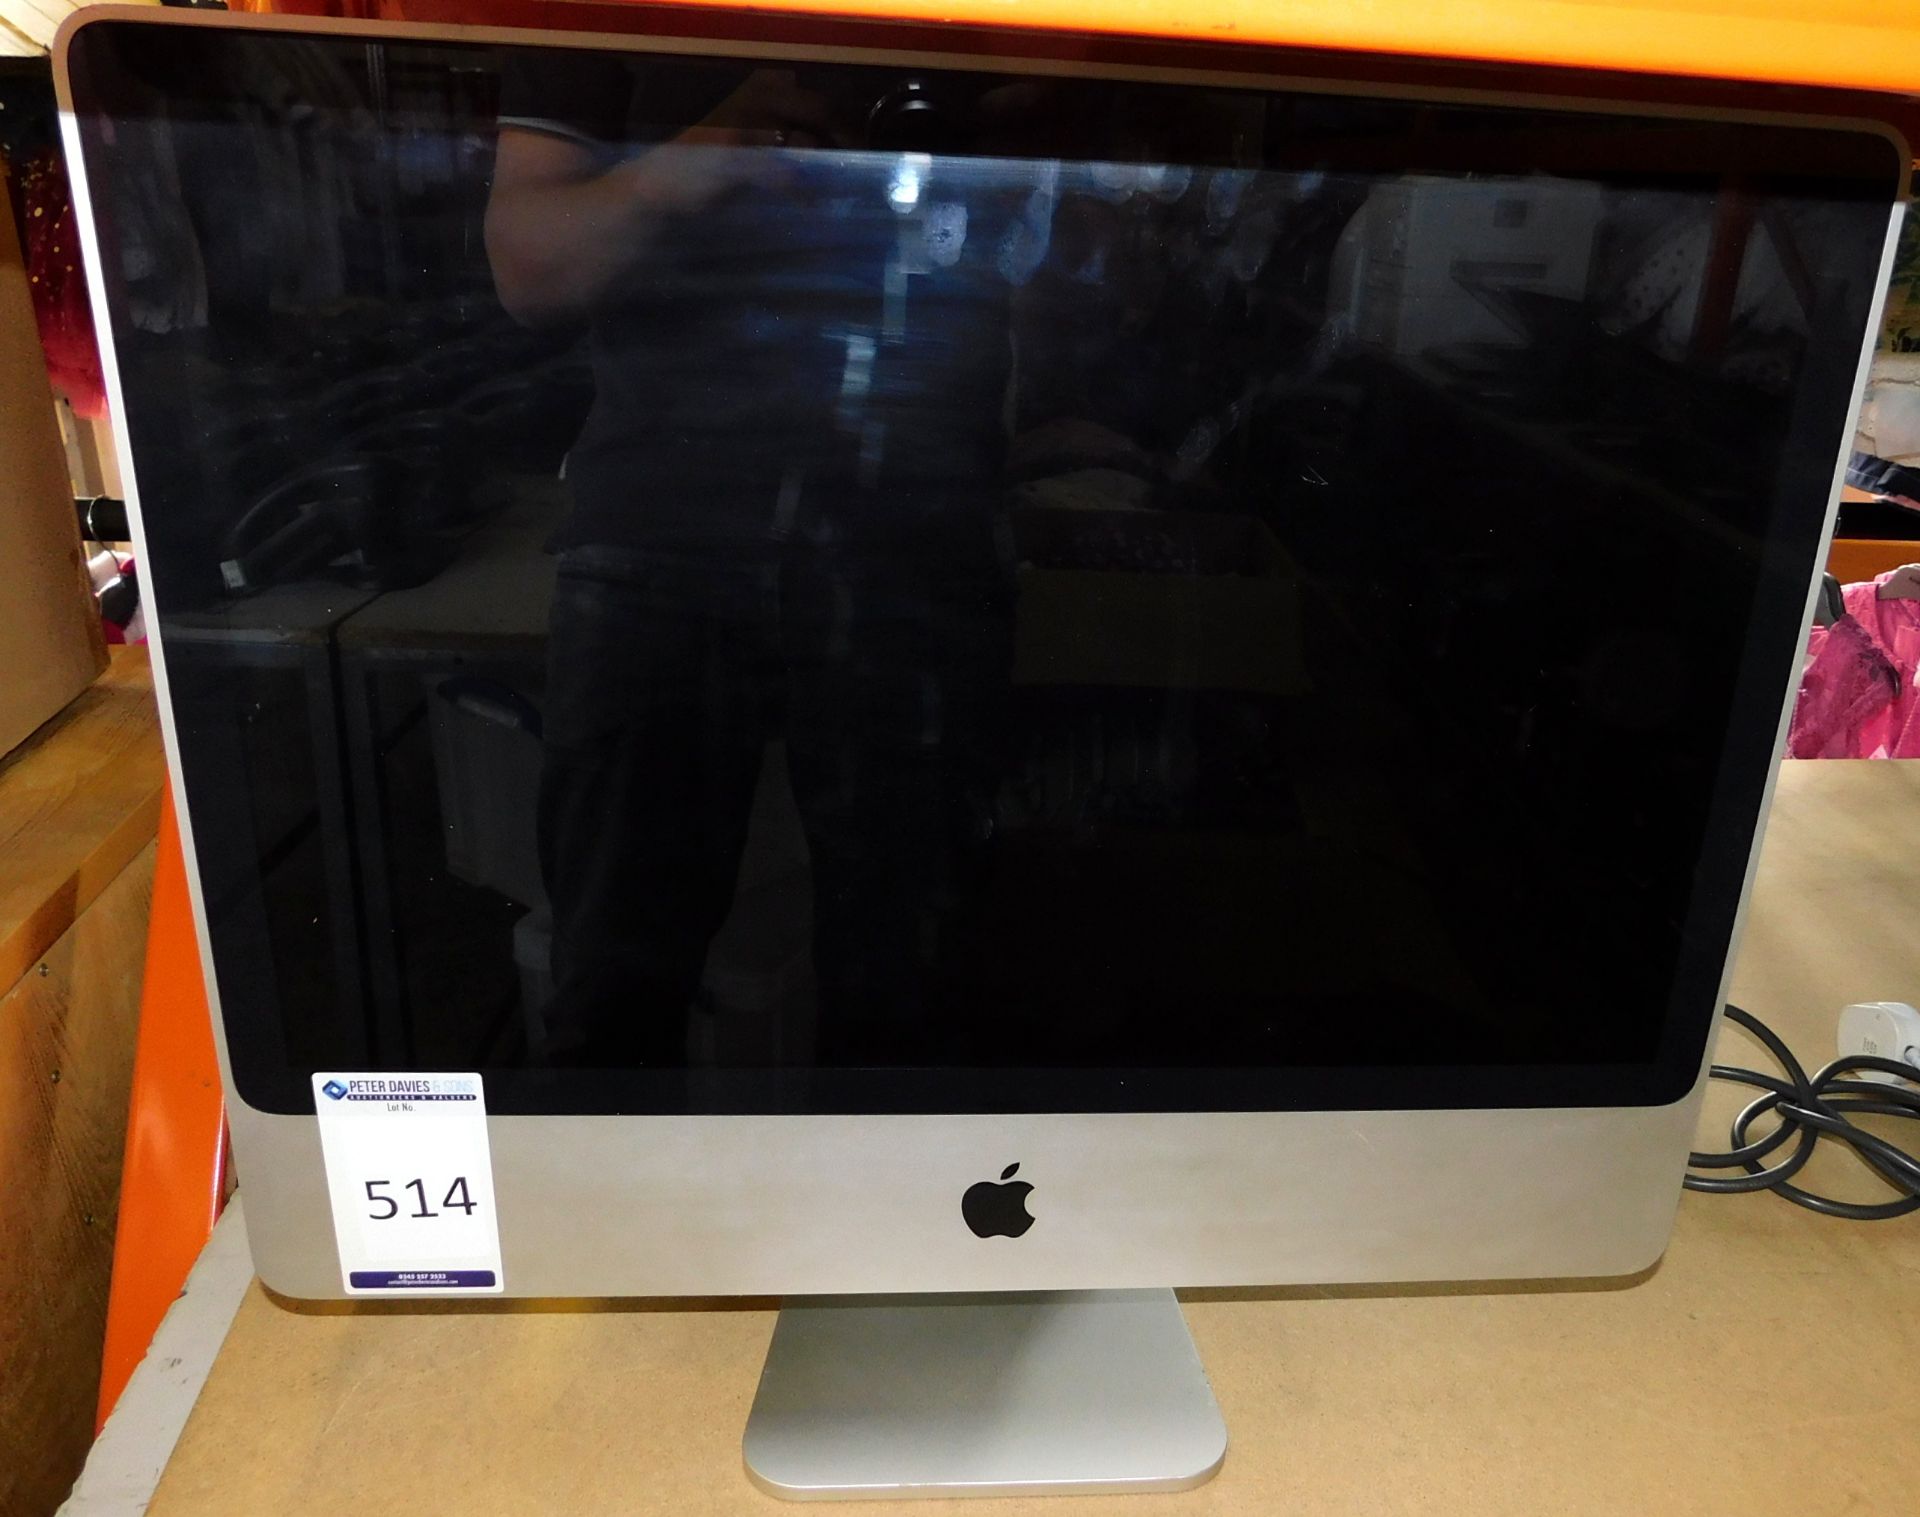 Apple A1225 2.8ghz Core 2 Exreme 24in iMac with 2gb RAM, 500gb HDD s/n 3U80800M1SC (Located